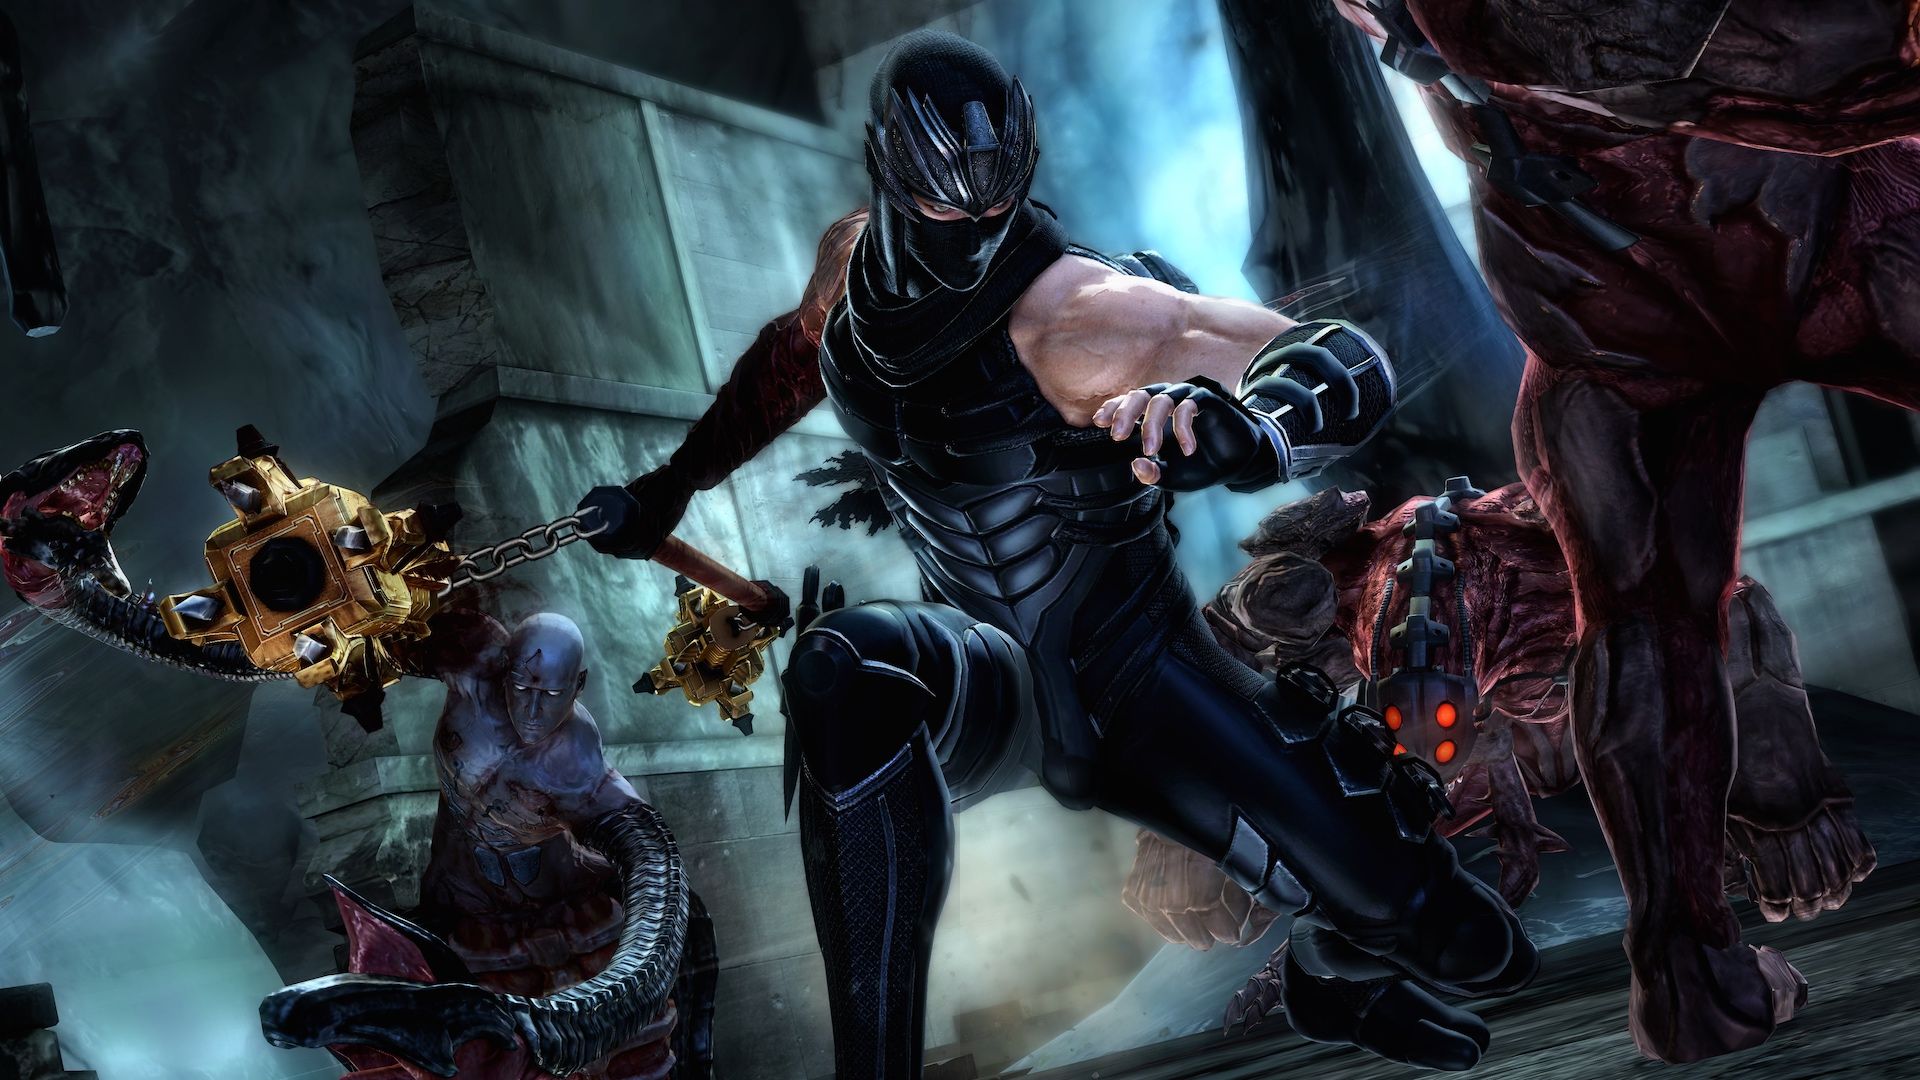 ninja gaiden master collection trophy guide